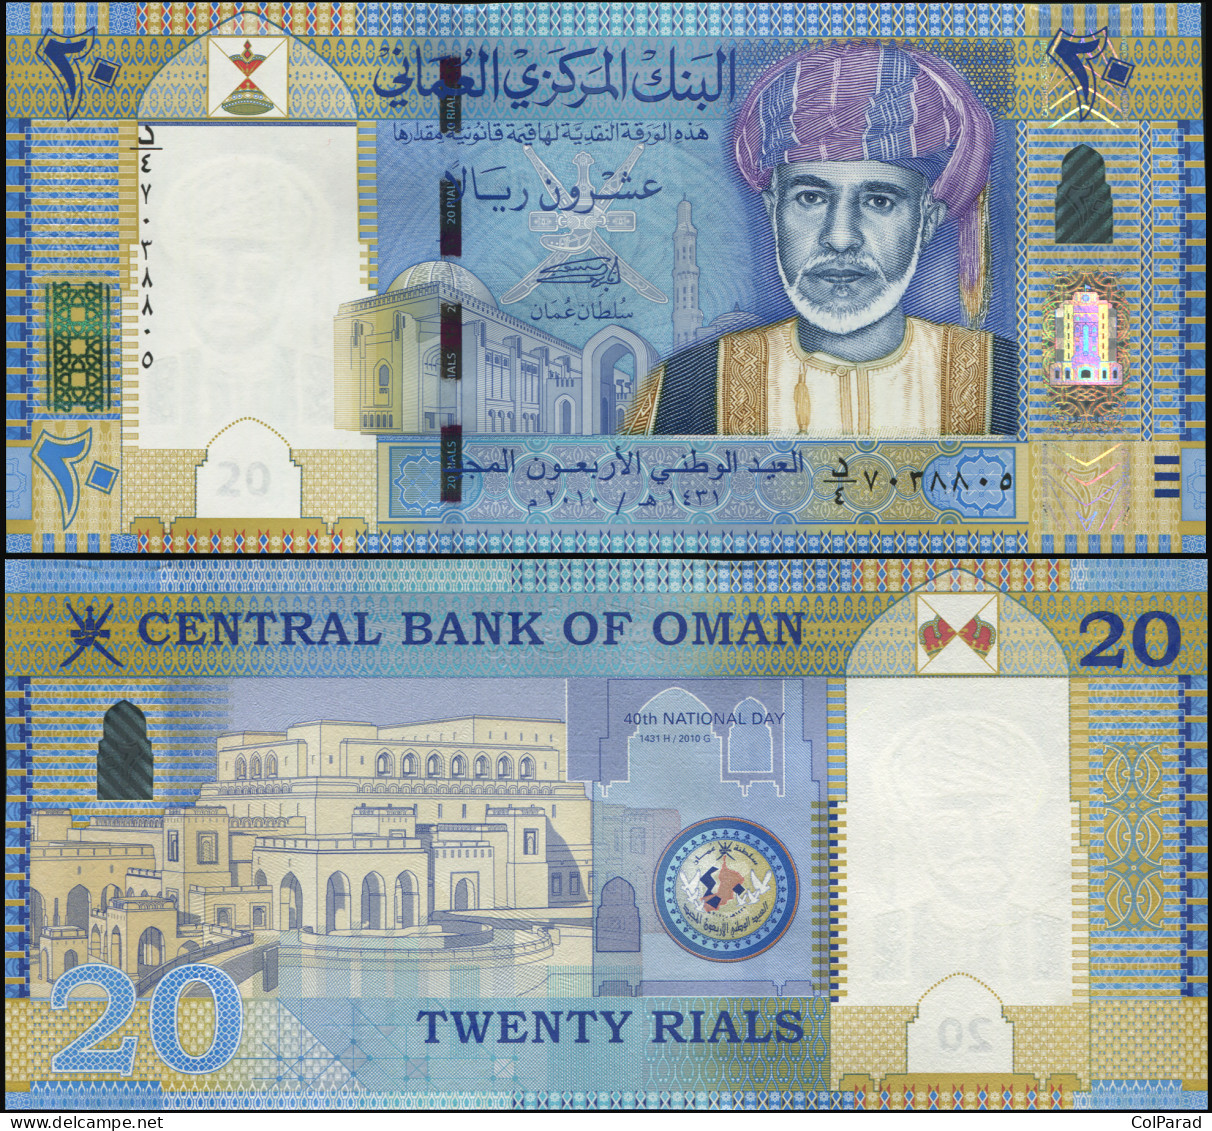 OMAN 20 RIALS - ٢٠١٠ (2010) - Paper Unc - P.46a Banknote - 40th National Day - Oman